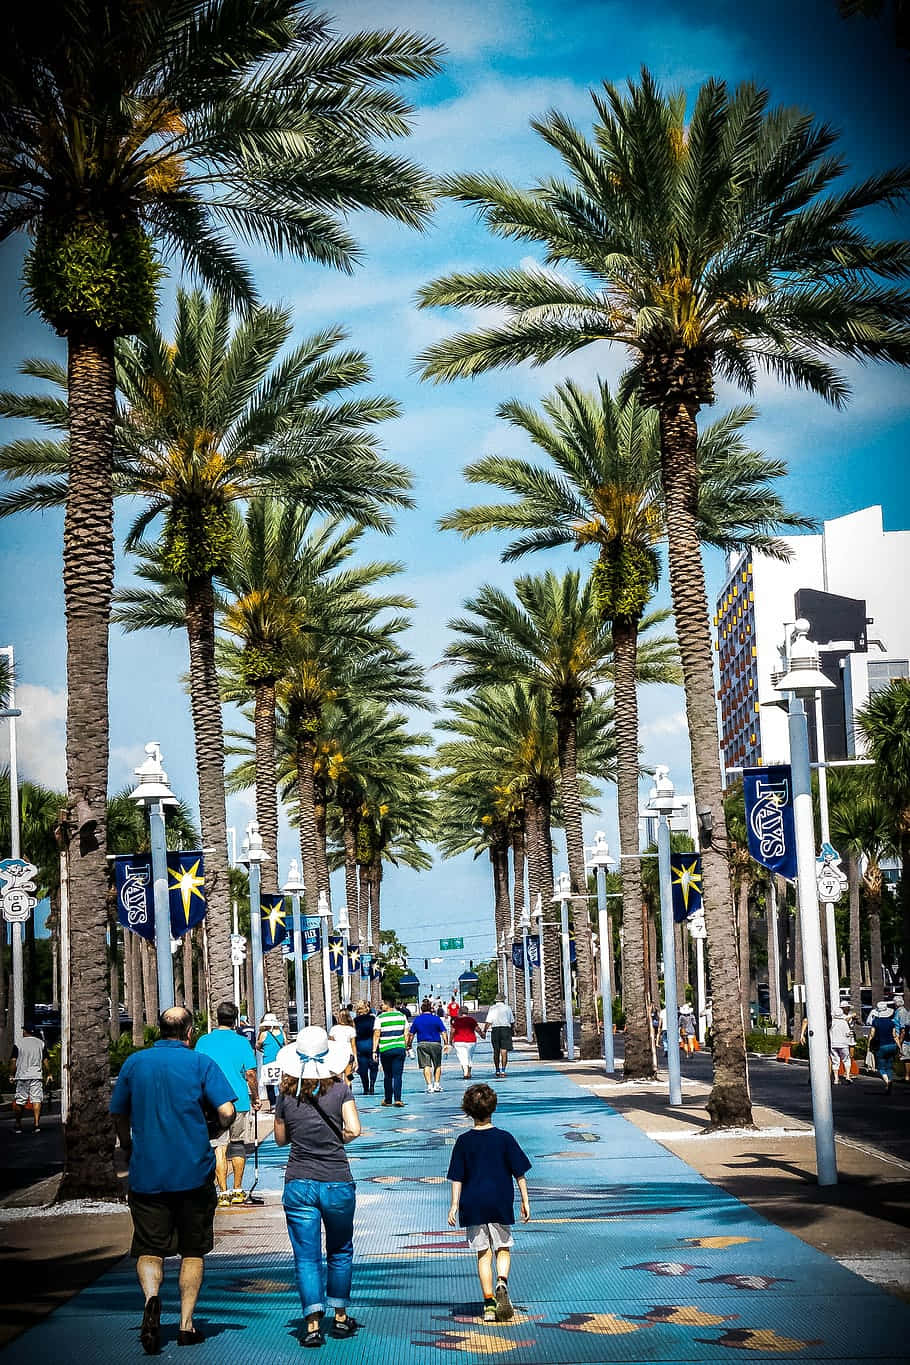 A Sidewalk With Palm Trees And People Walking